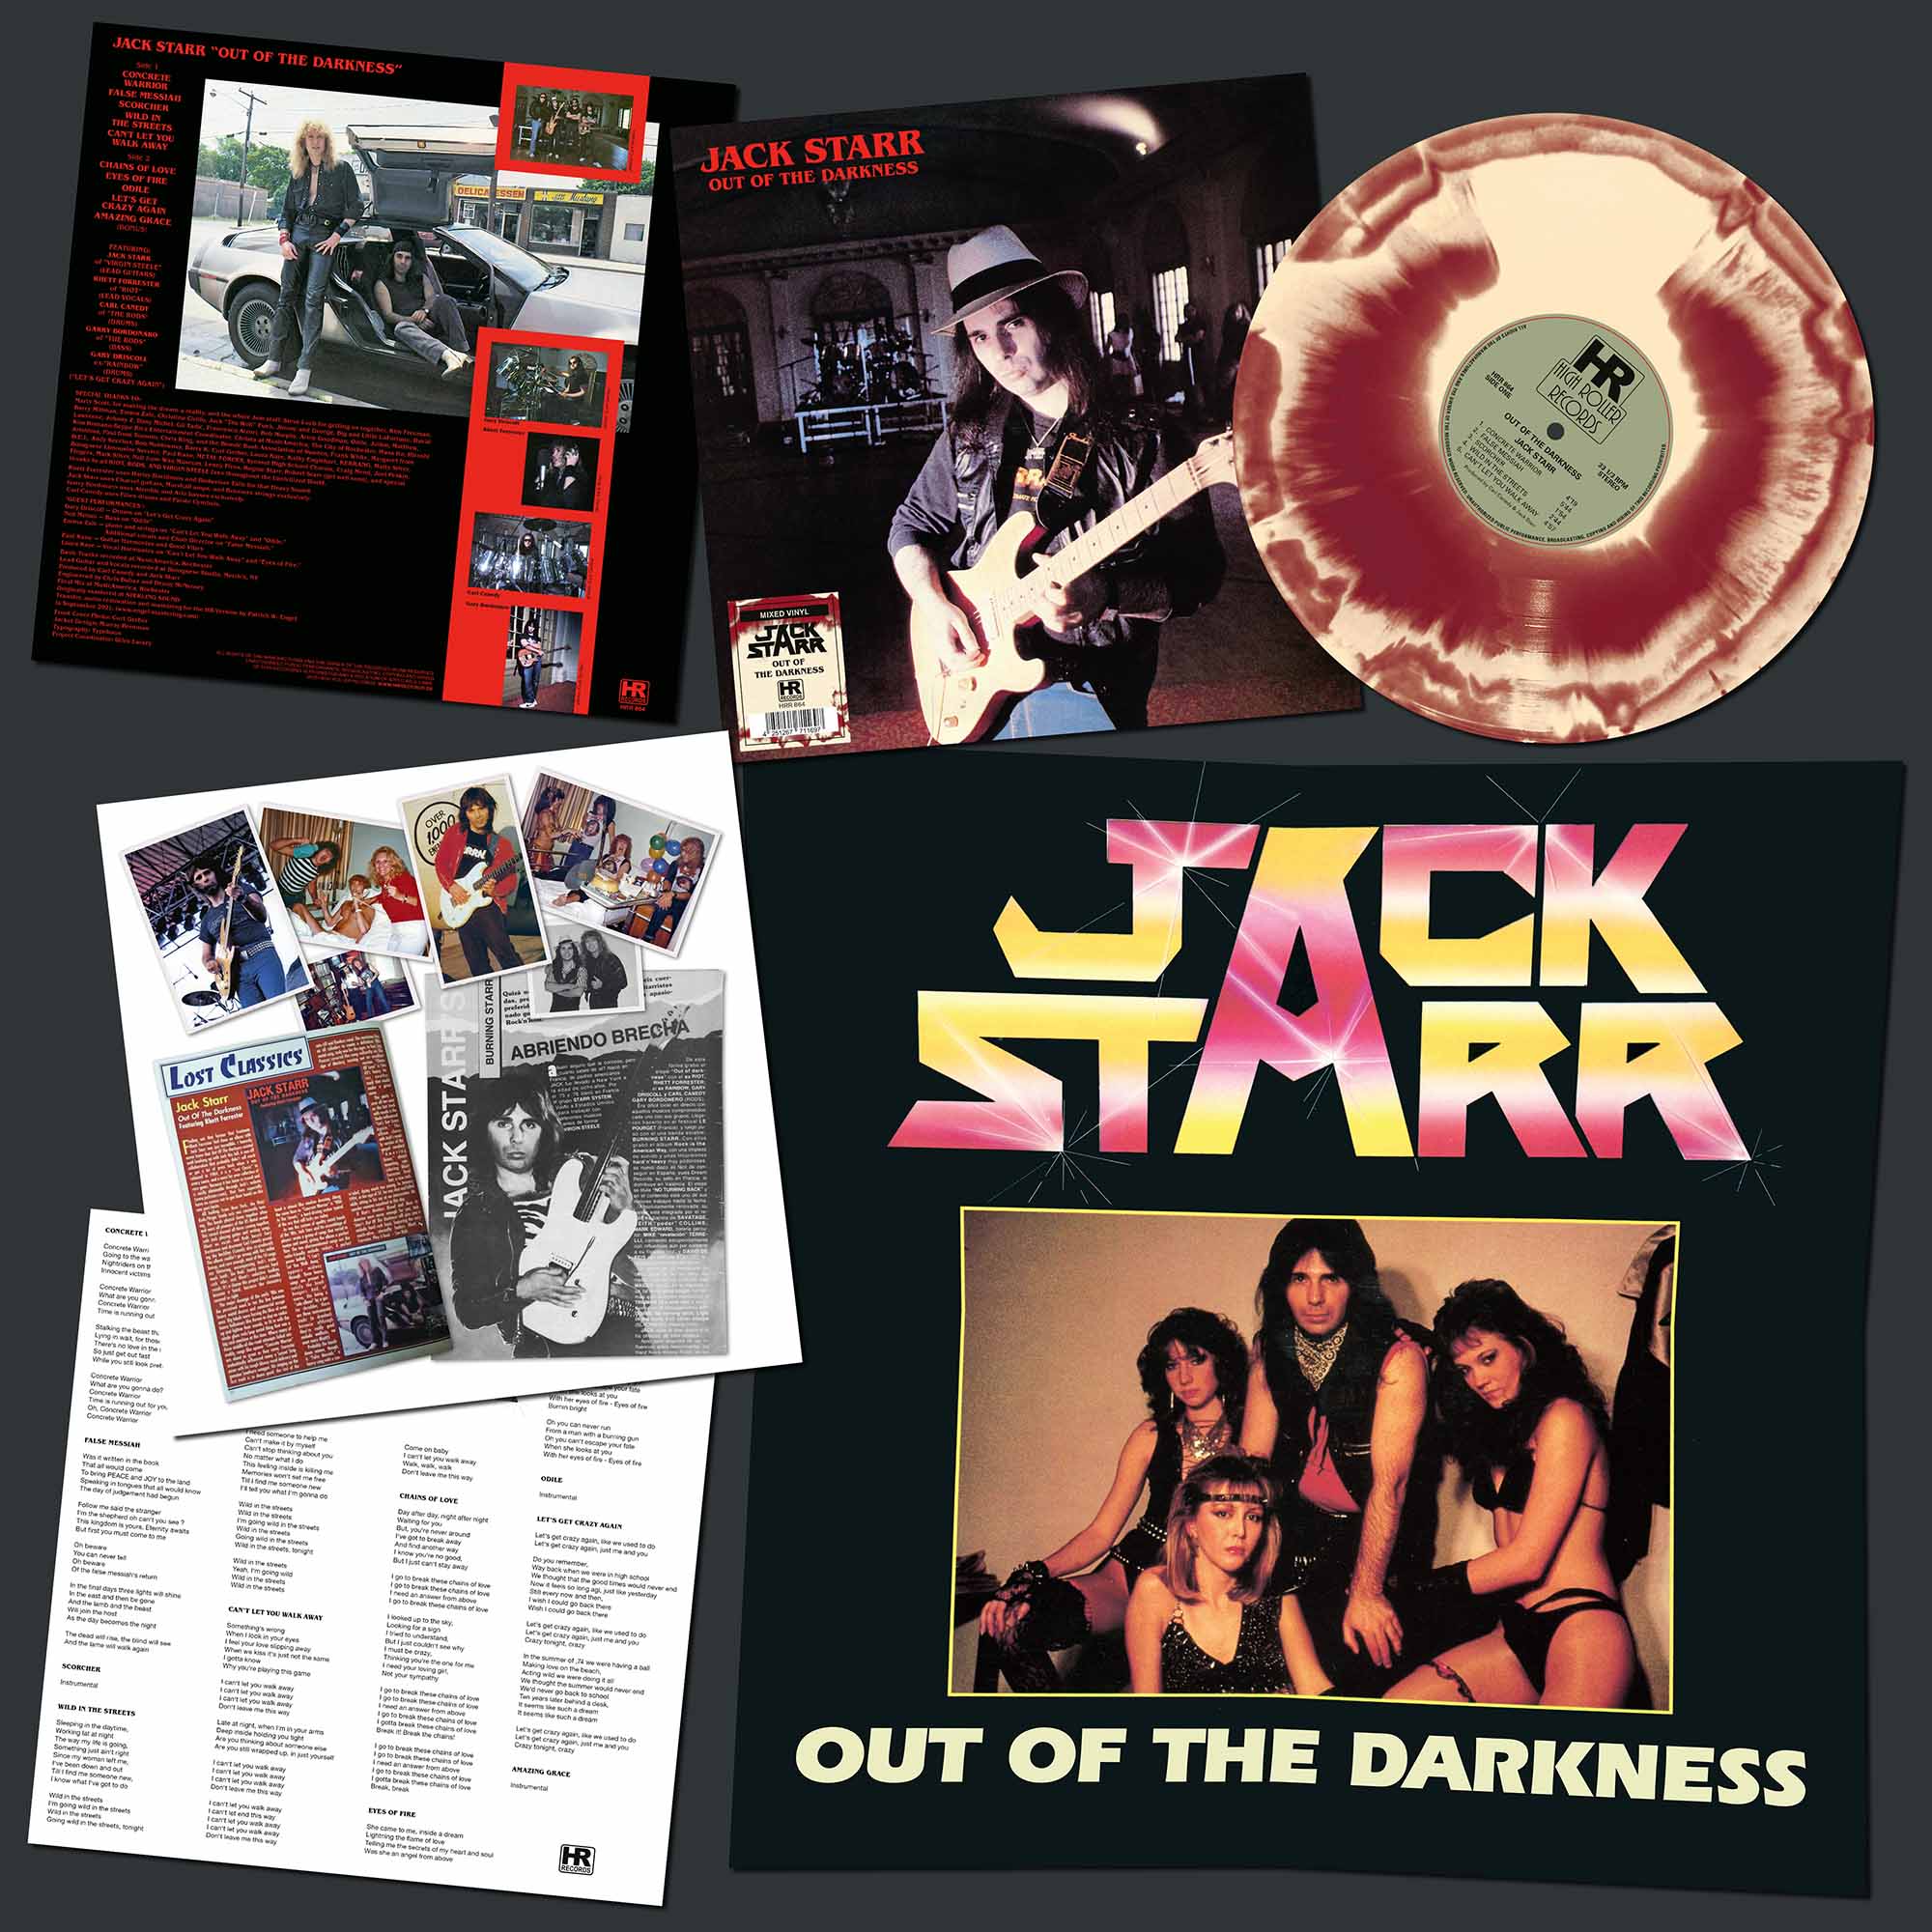 JACK STARR - Out of the Darkness  LP